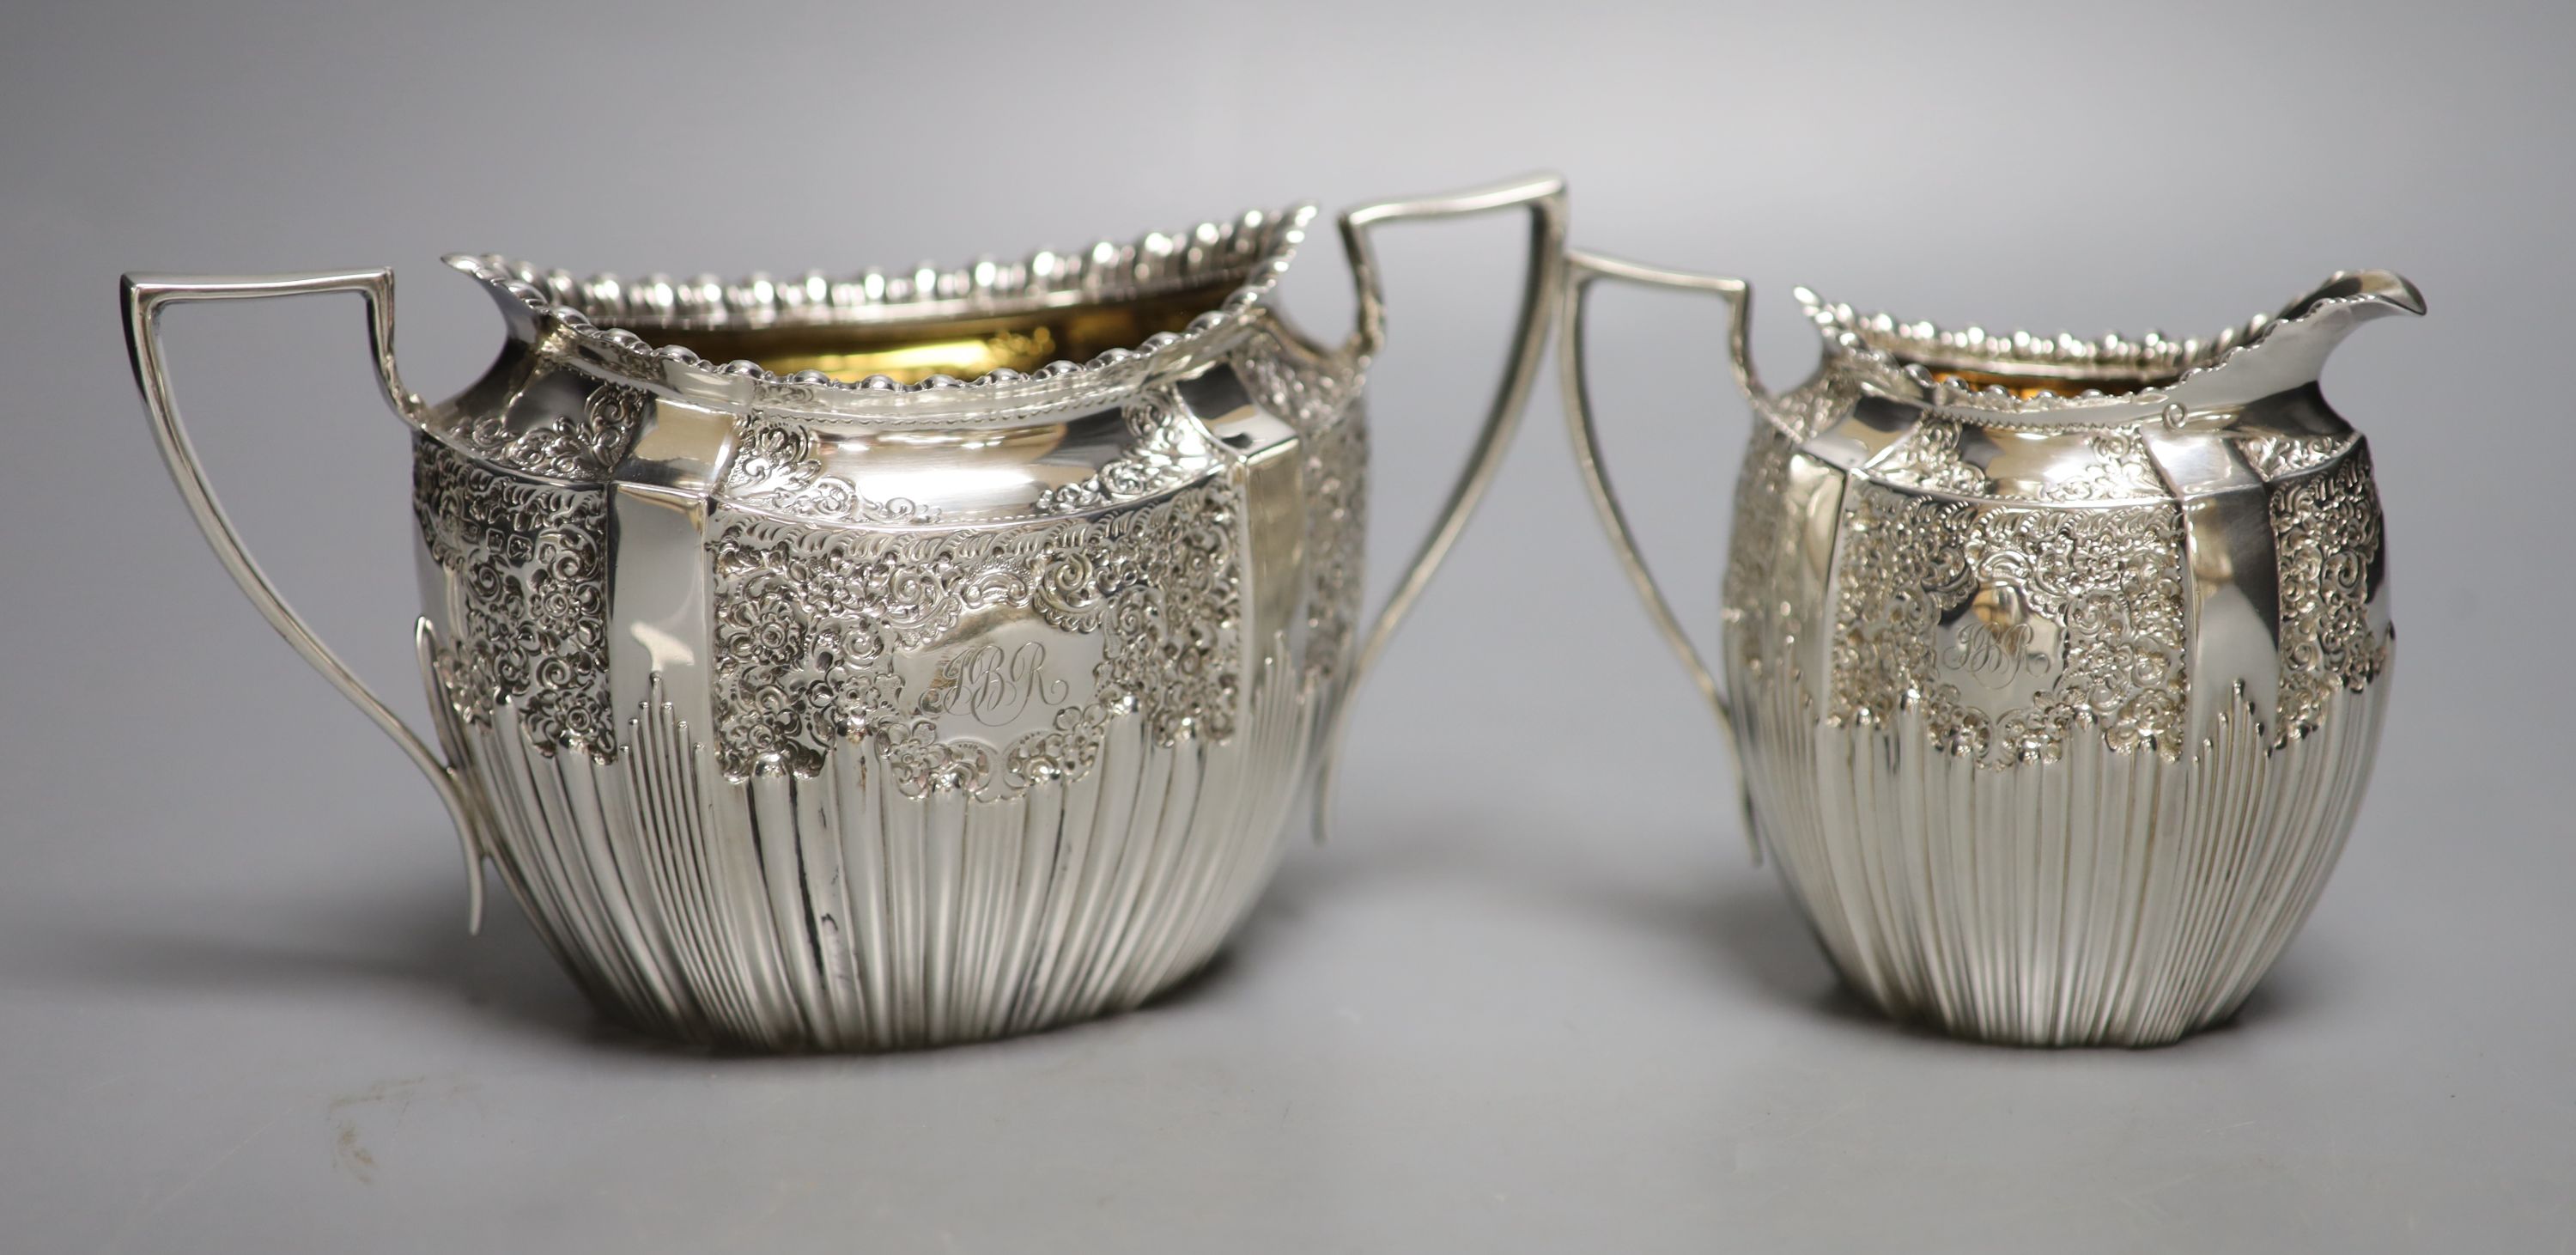 A late Victorian embossed silver sugar bowl and cream jug, James Dixon & Sons, Sheffield, 1896/7,